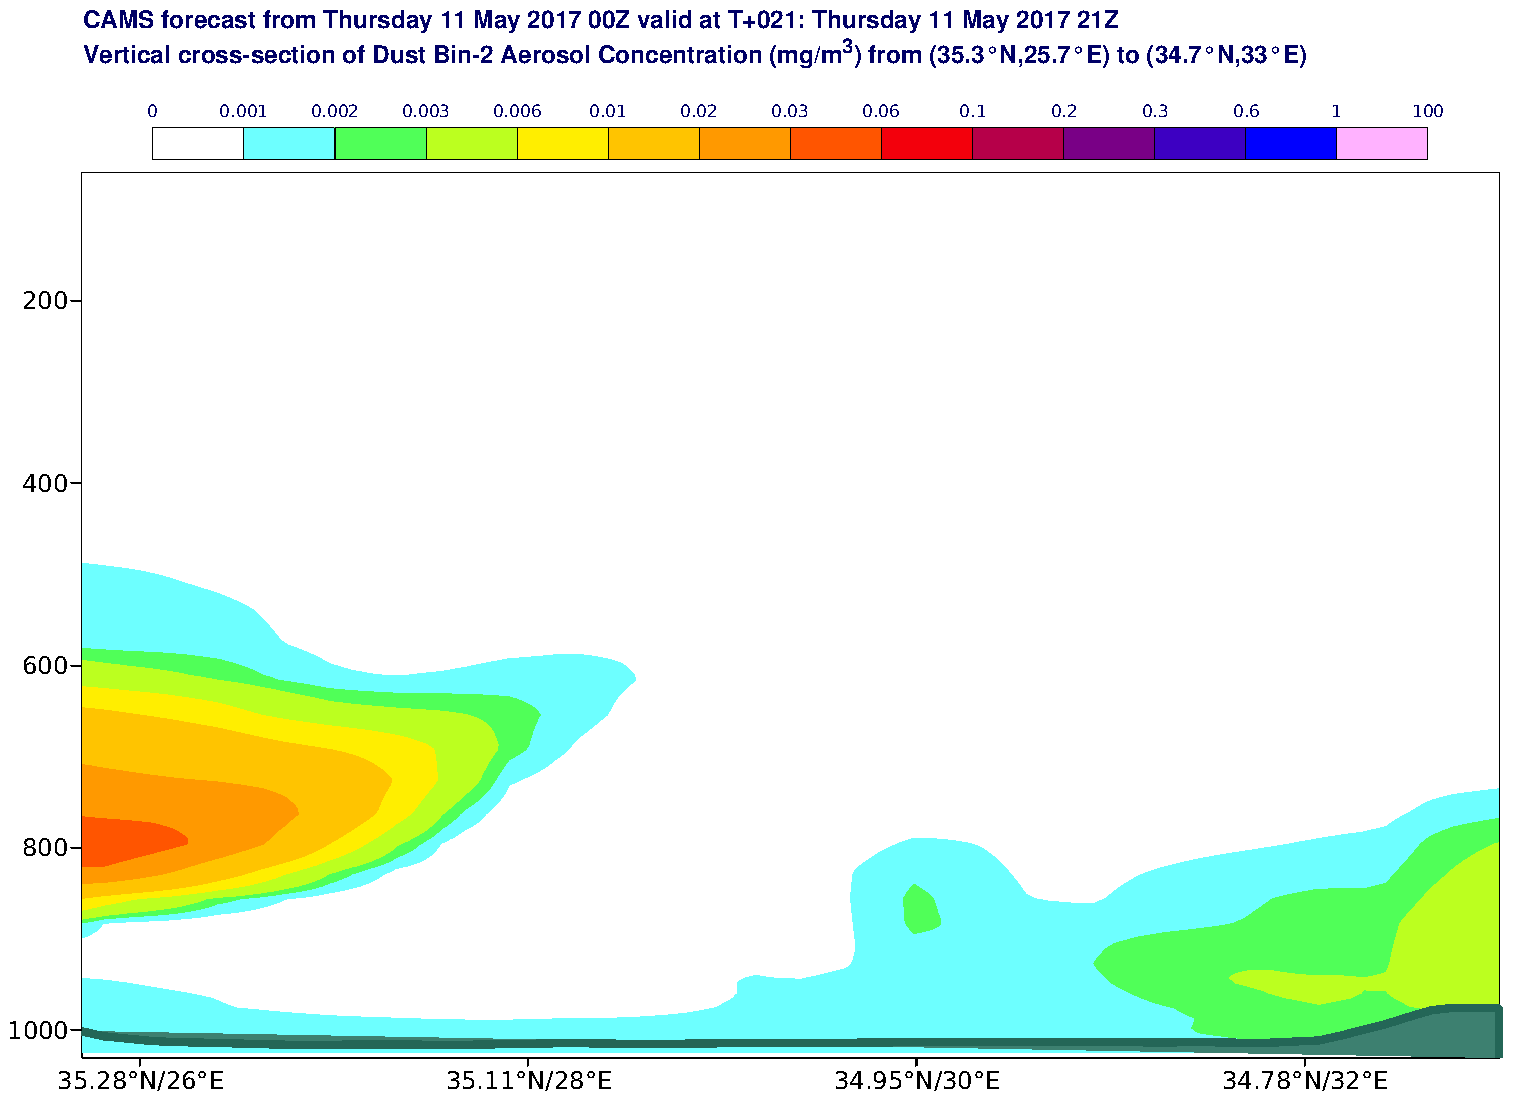 Vertical cross-section of Dust Bin-2 Aerosol Concentration (mg/m3) valid at T21 - 2017-05-11 21:00